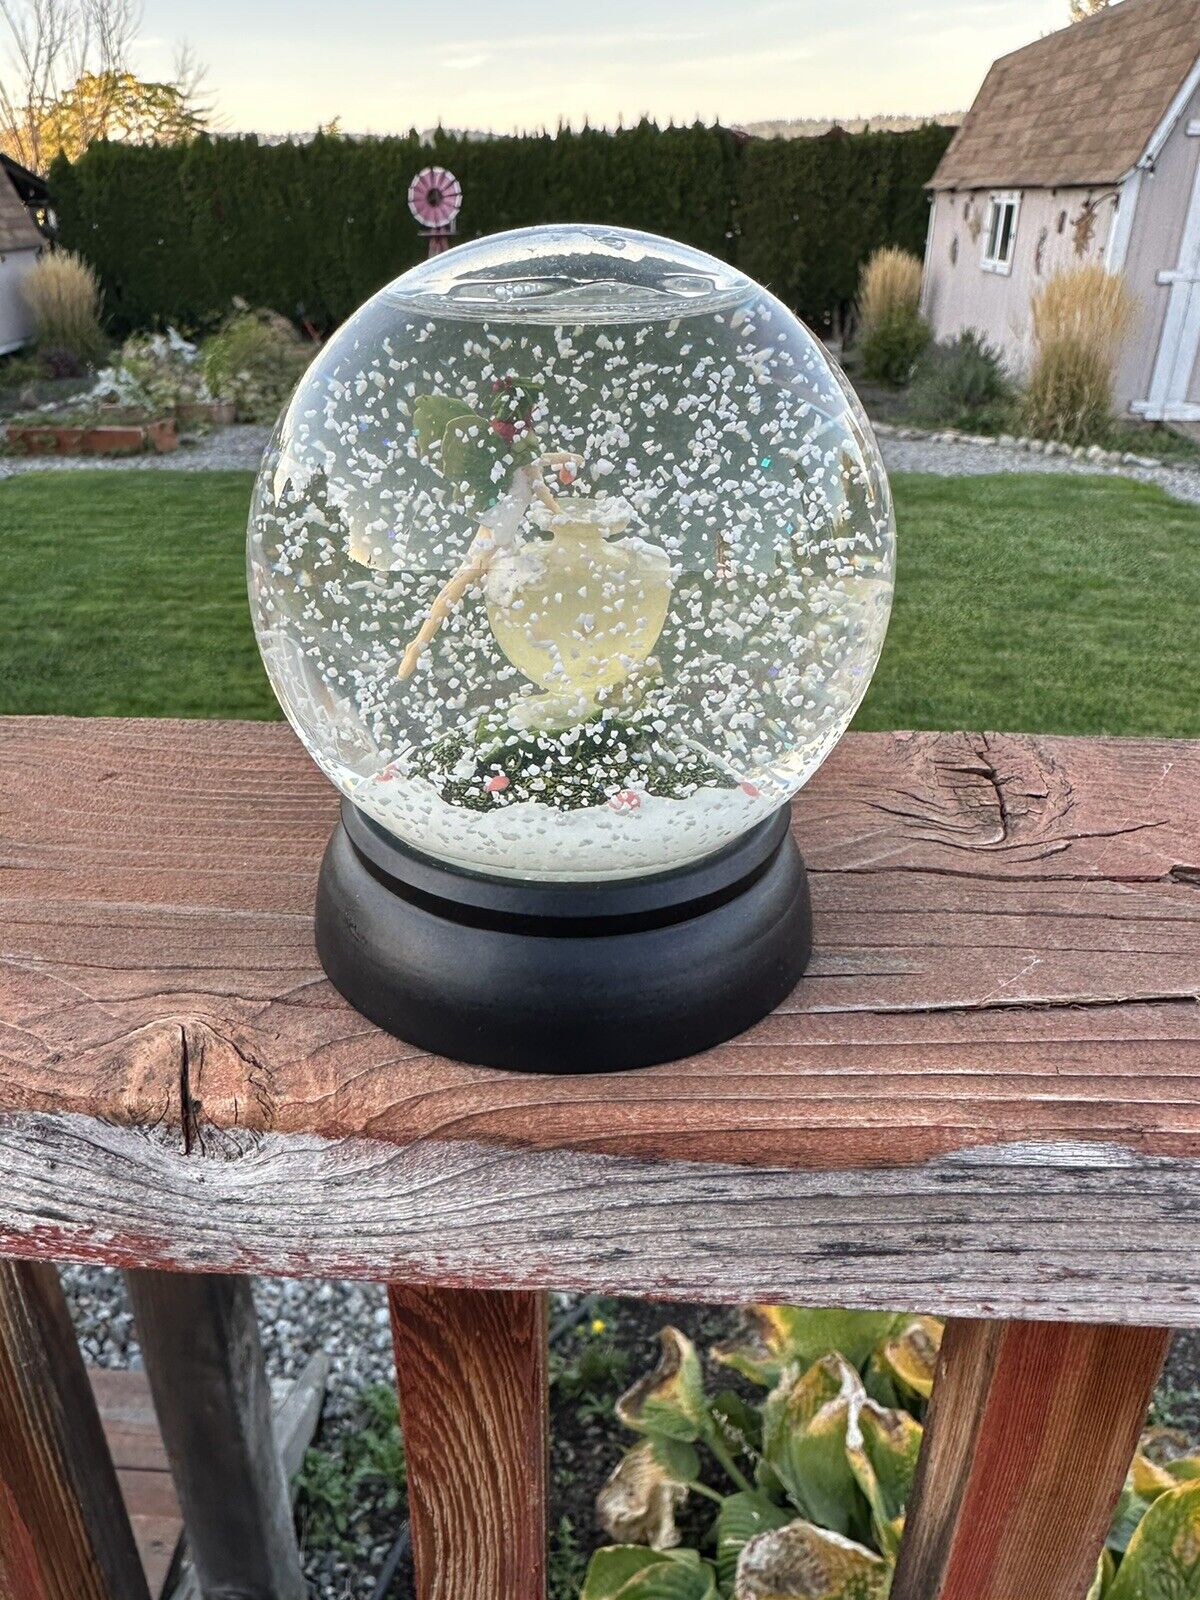 Nordstrom Lily P. Frost Make a Beauty Wish Snow Globe Retired 2003 Rare